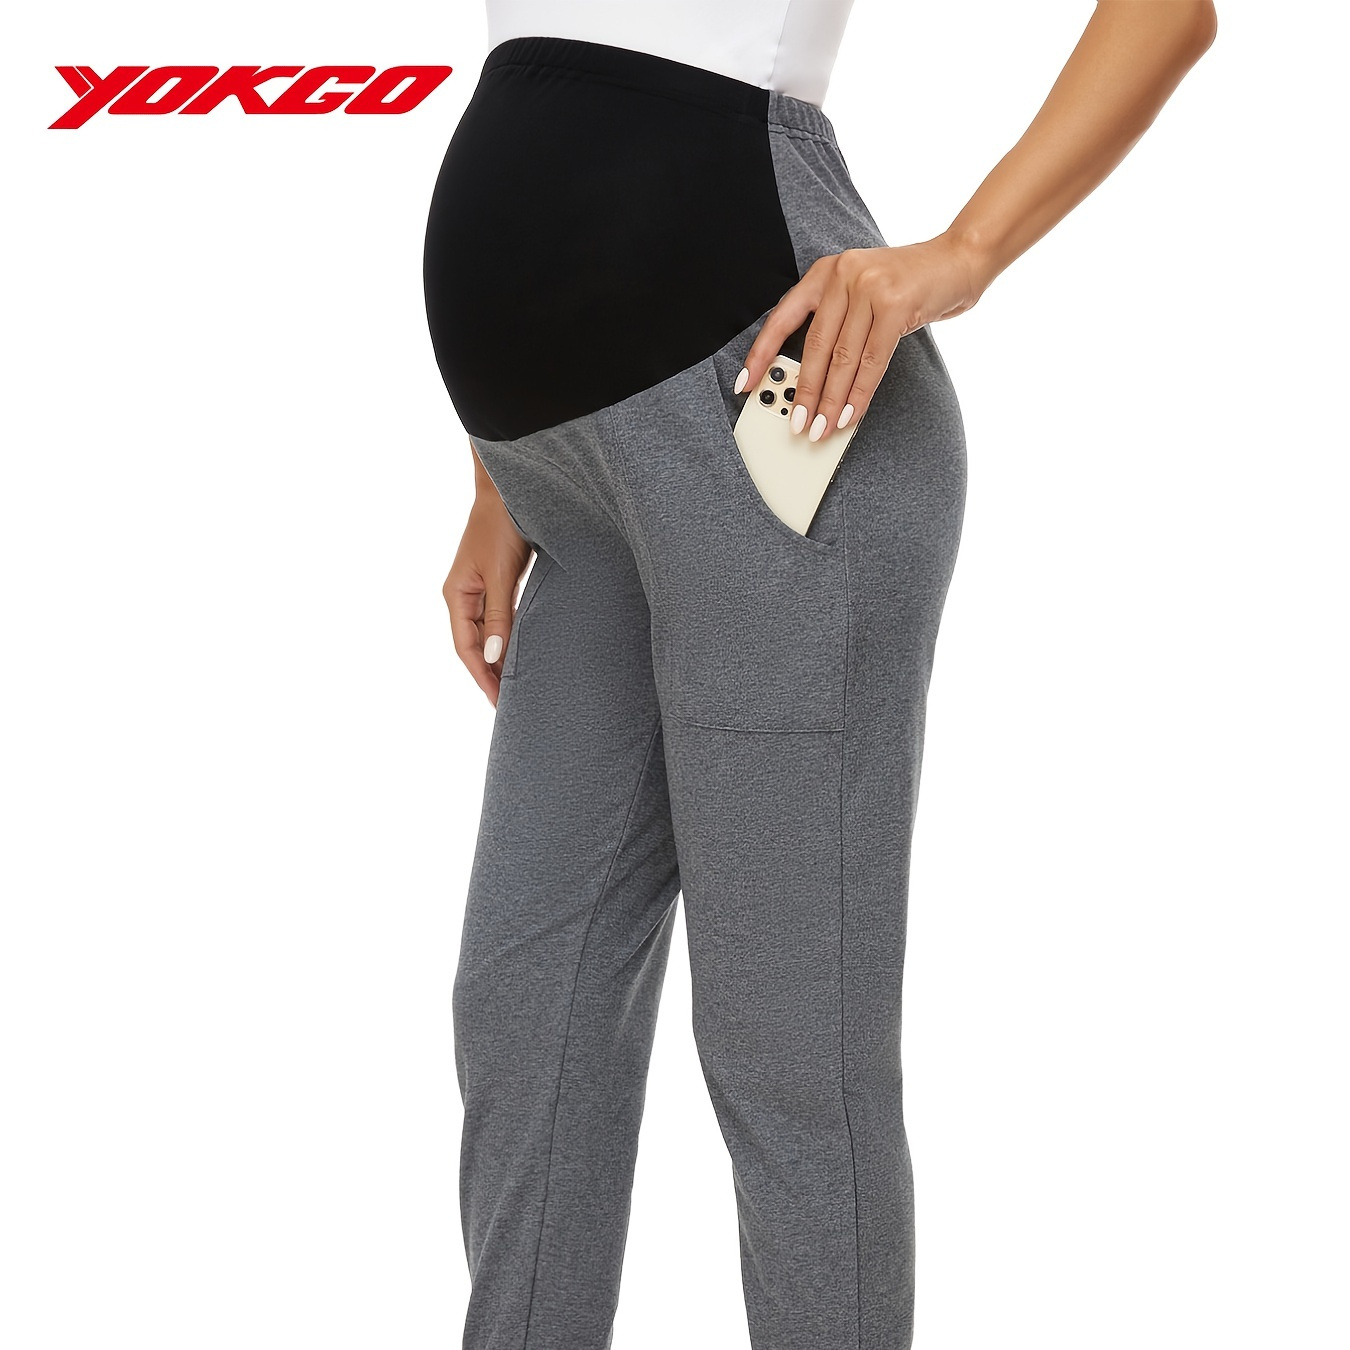 Comfy & Stretchy High Waist Tummy Support Maternity Sweatpants, Pregnant  Women's Slightly Stretch Breathable Joggers